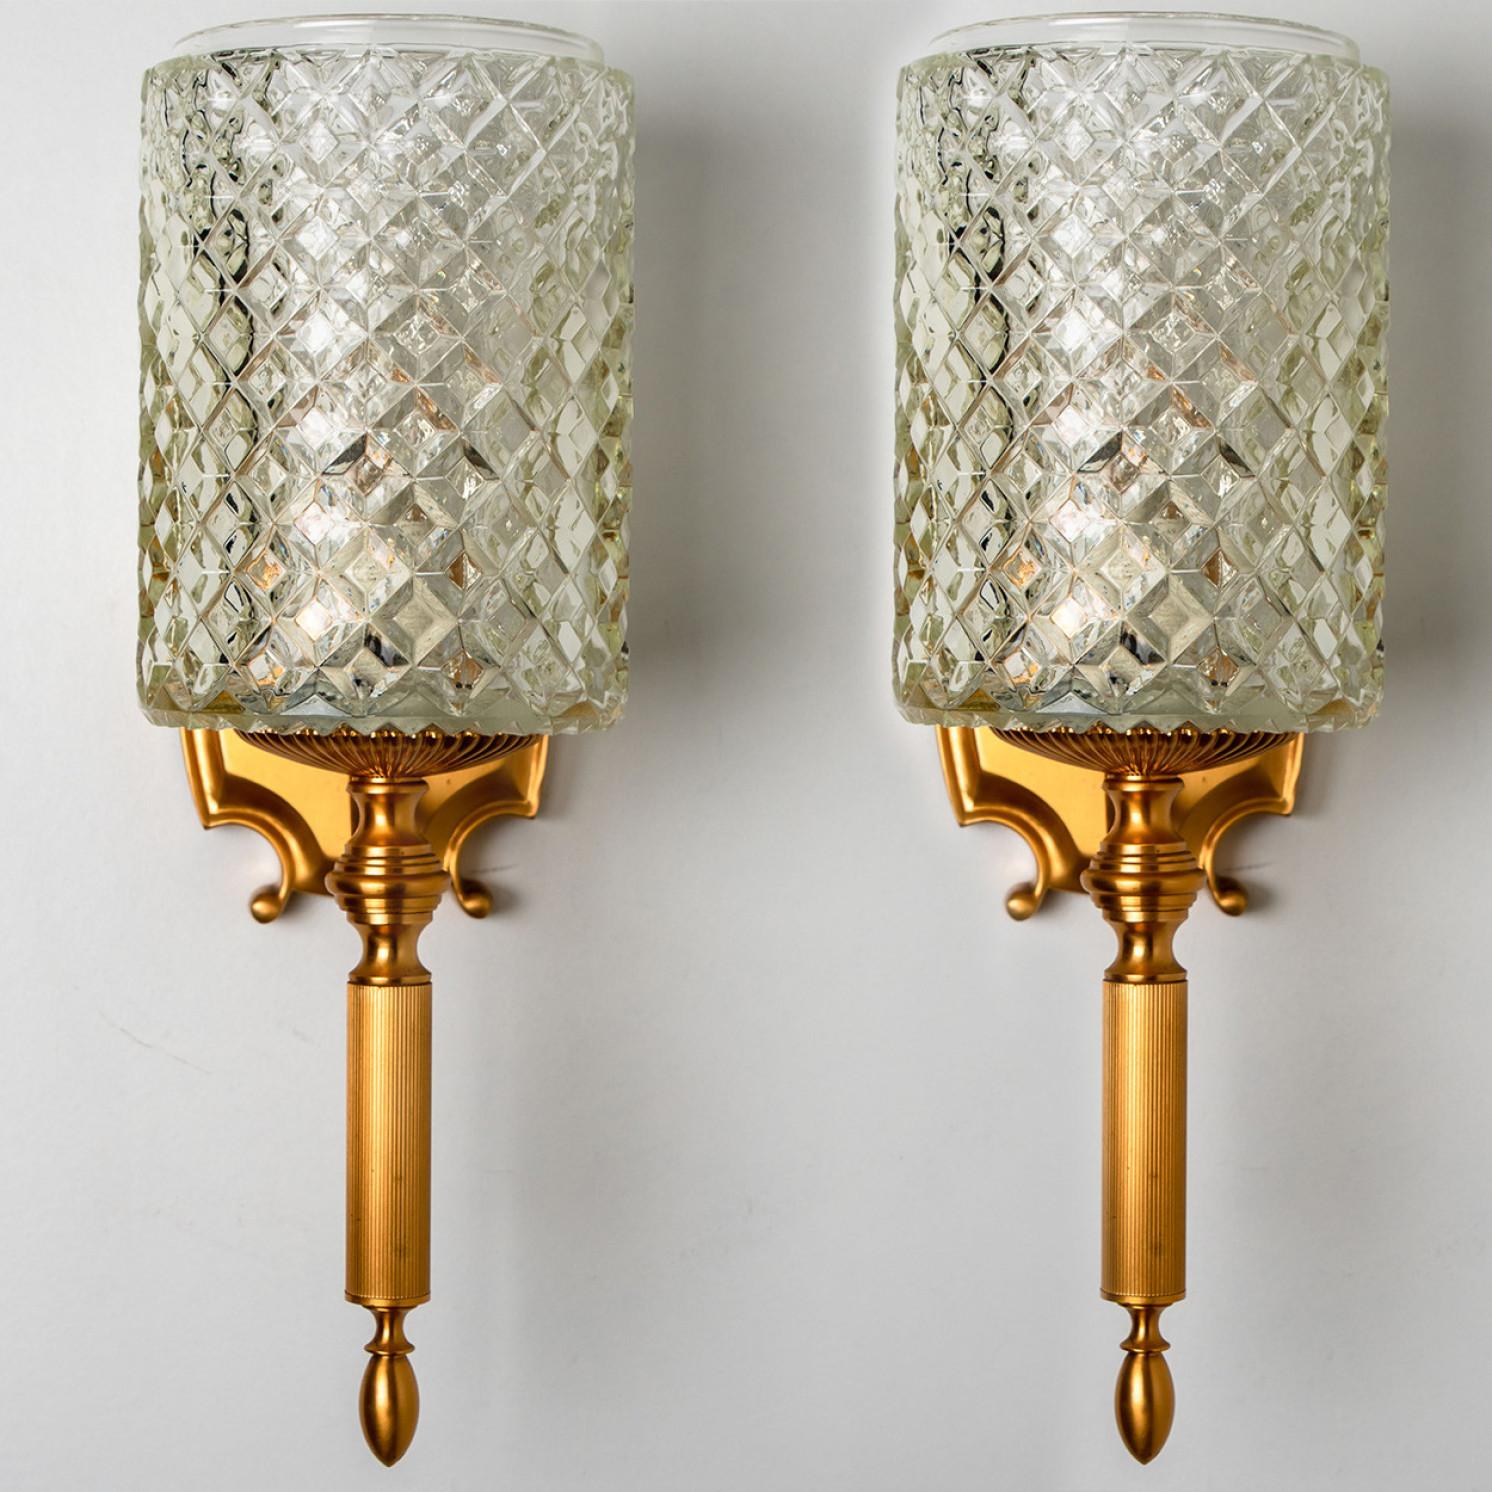 Mid-Century Modern Textured Glass and Brass Wall Lights, Germany, 1960s For Sale